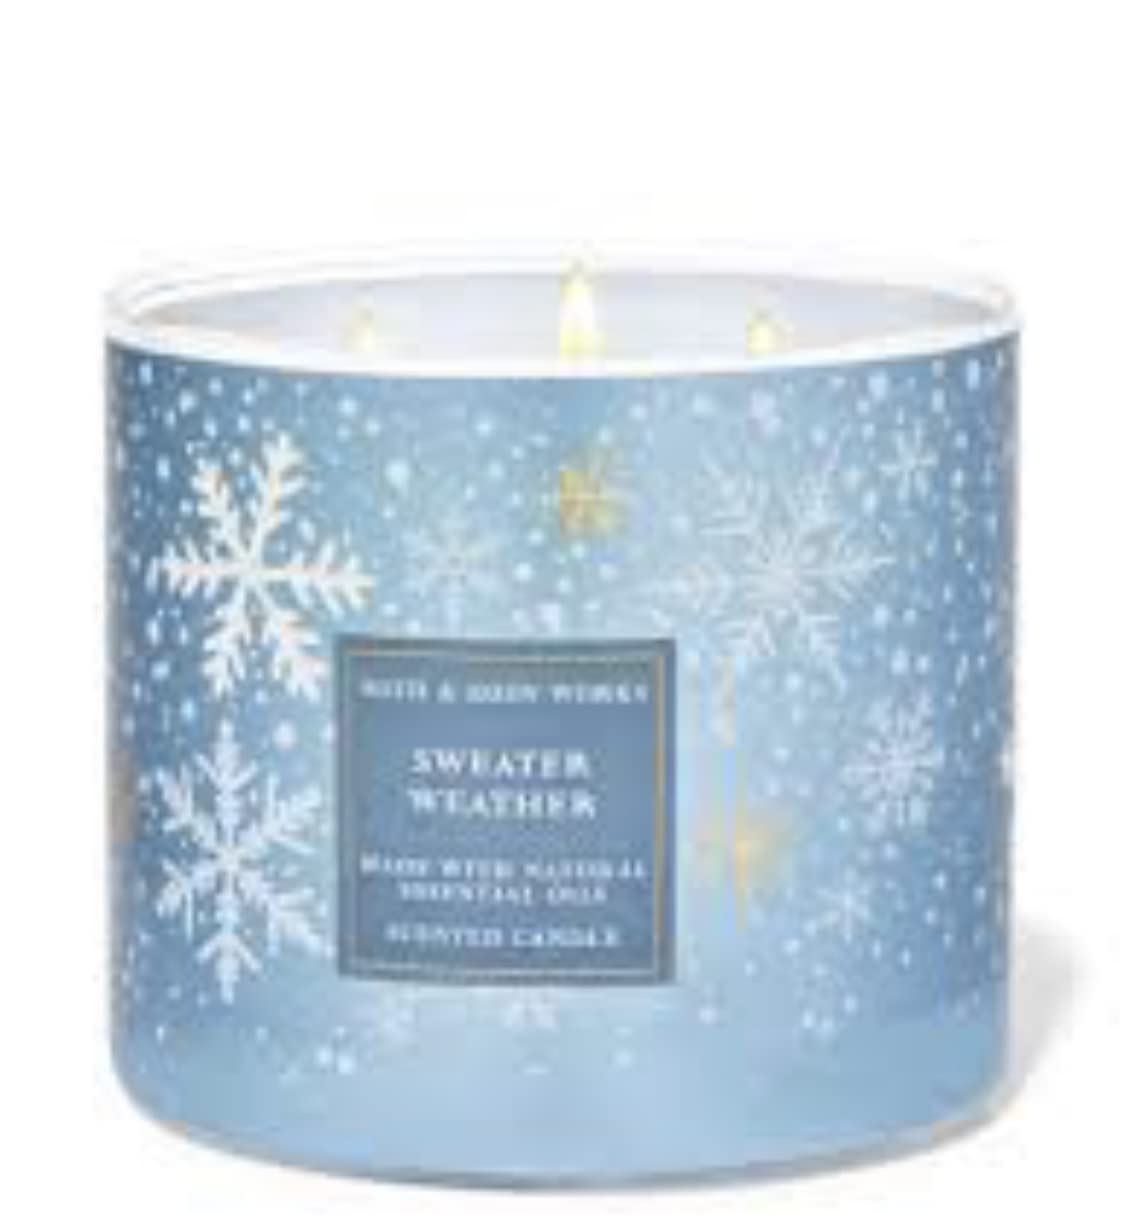 Bath and Body Works Sweater Weather 3 Wick Scented Candle